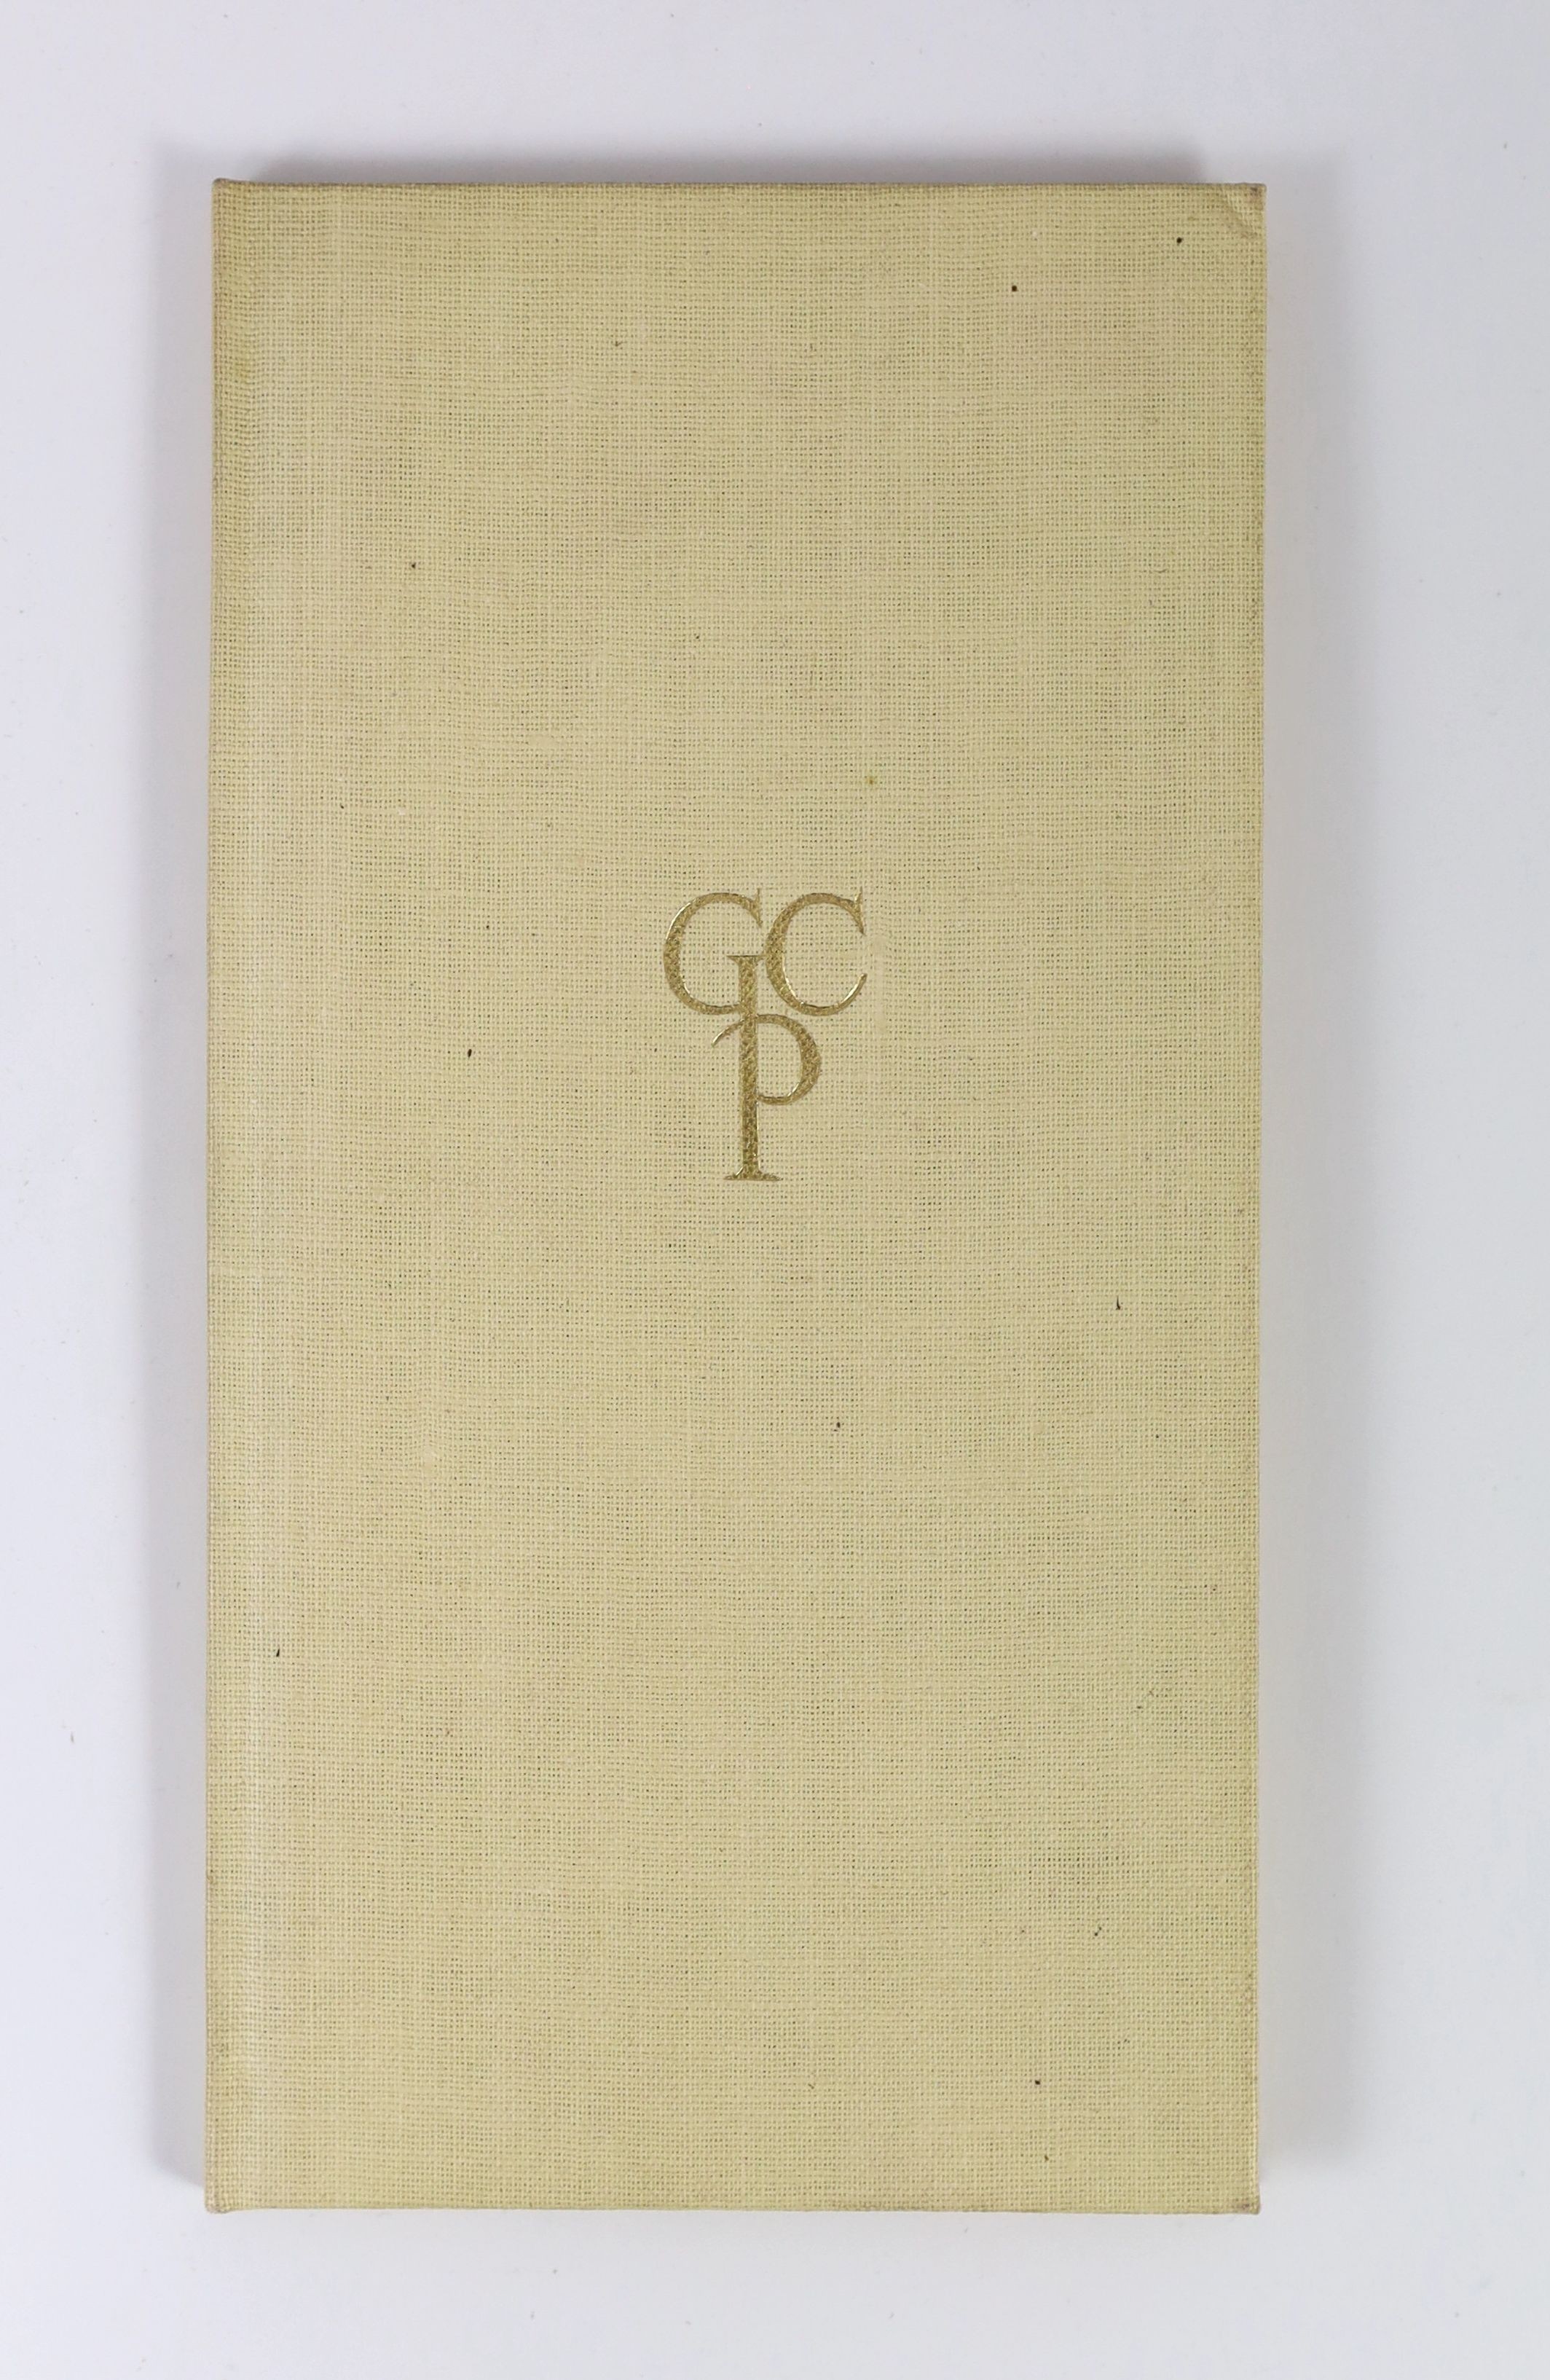 Golden Cockerel Press - Gill, Eric - The Lord’s Song. A Sermon, one of 500, cream buckram, with gilt monograms GCP, with two wood-engravings, Waltham Saint Lawrence, 1934